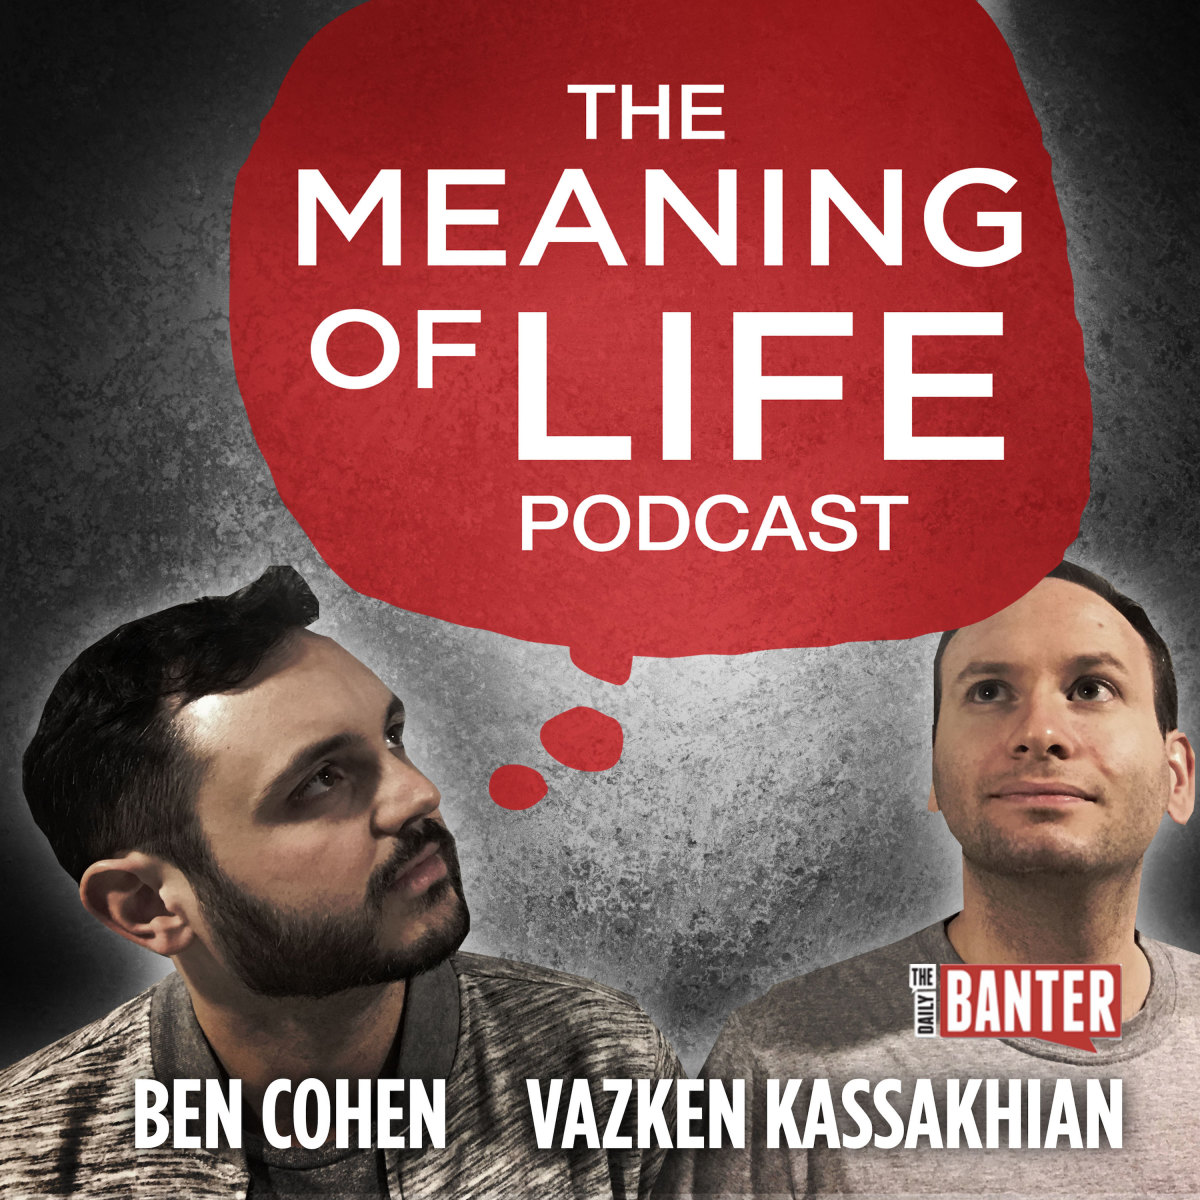 Meaning of Life Podcast Image.jpg